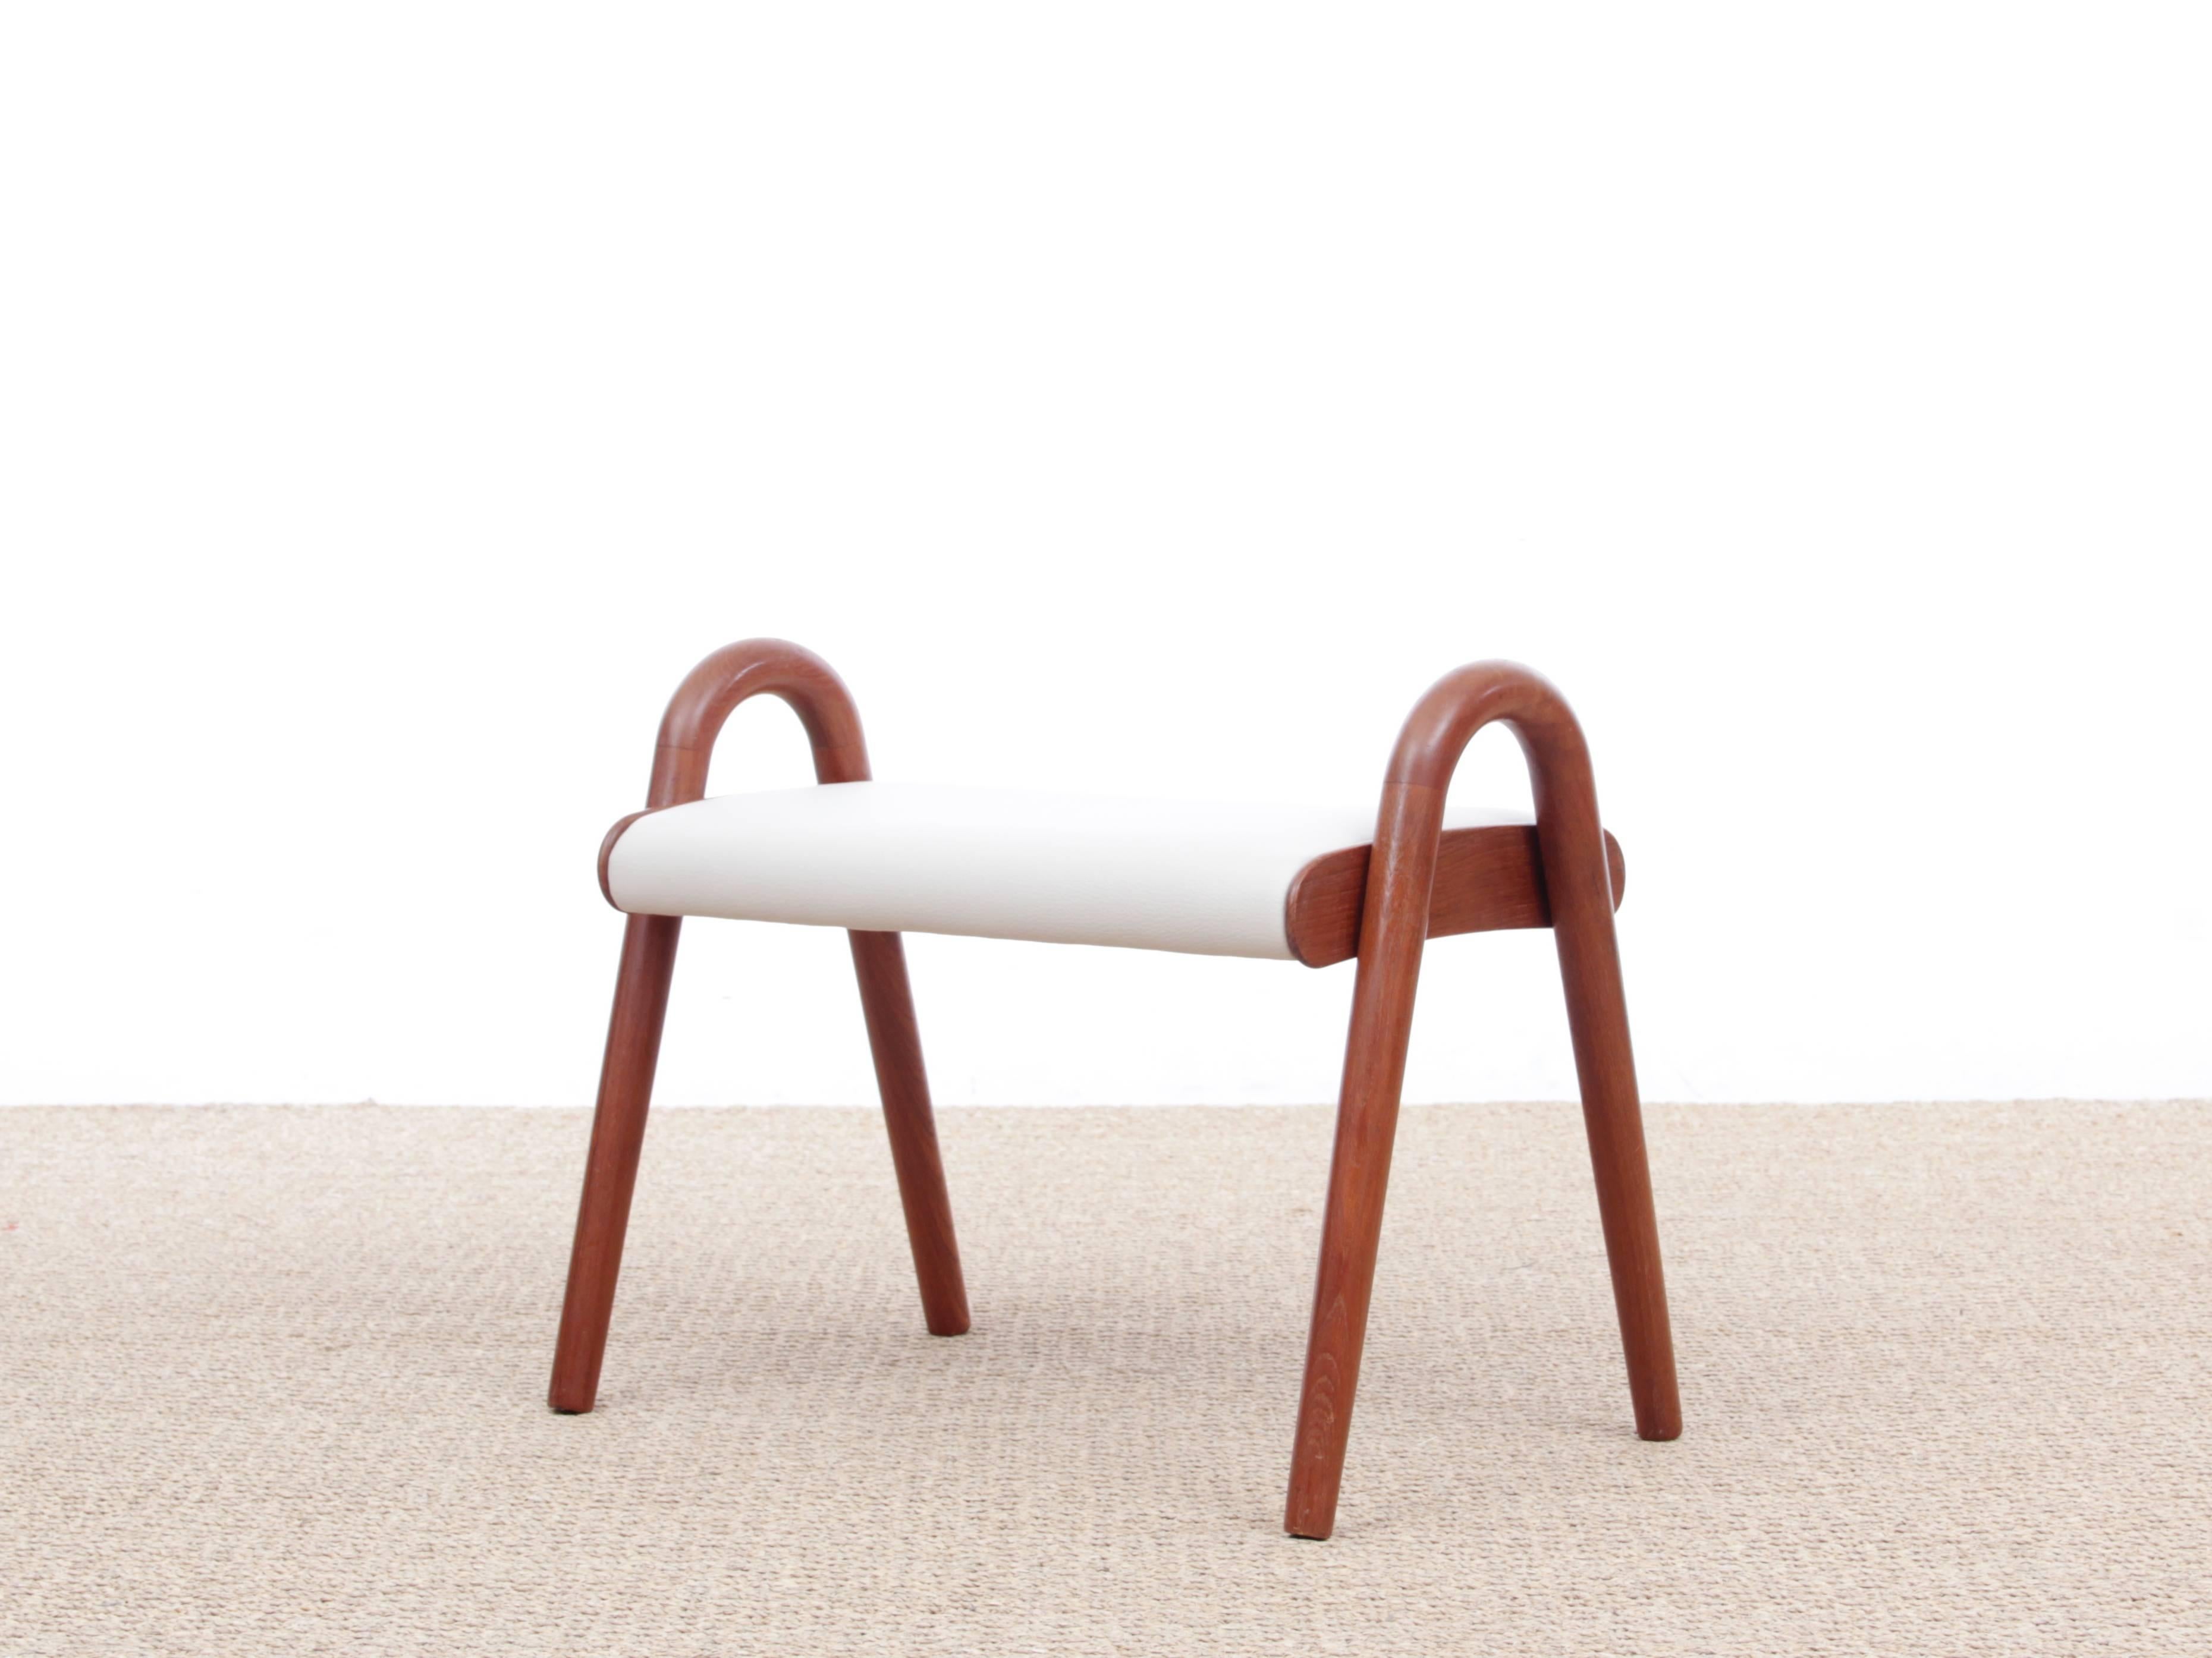 Mid-Century Modern Scandinavian foot stool by Vilhelm Lauritzen. Solid teak. Newly reupholstered in Ivory leather.